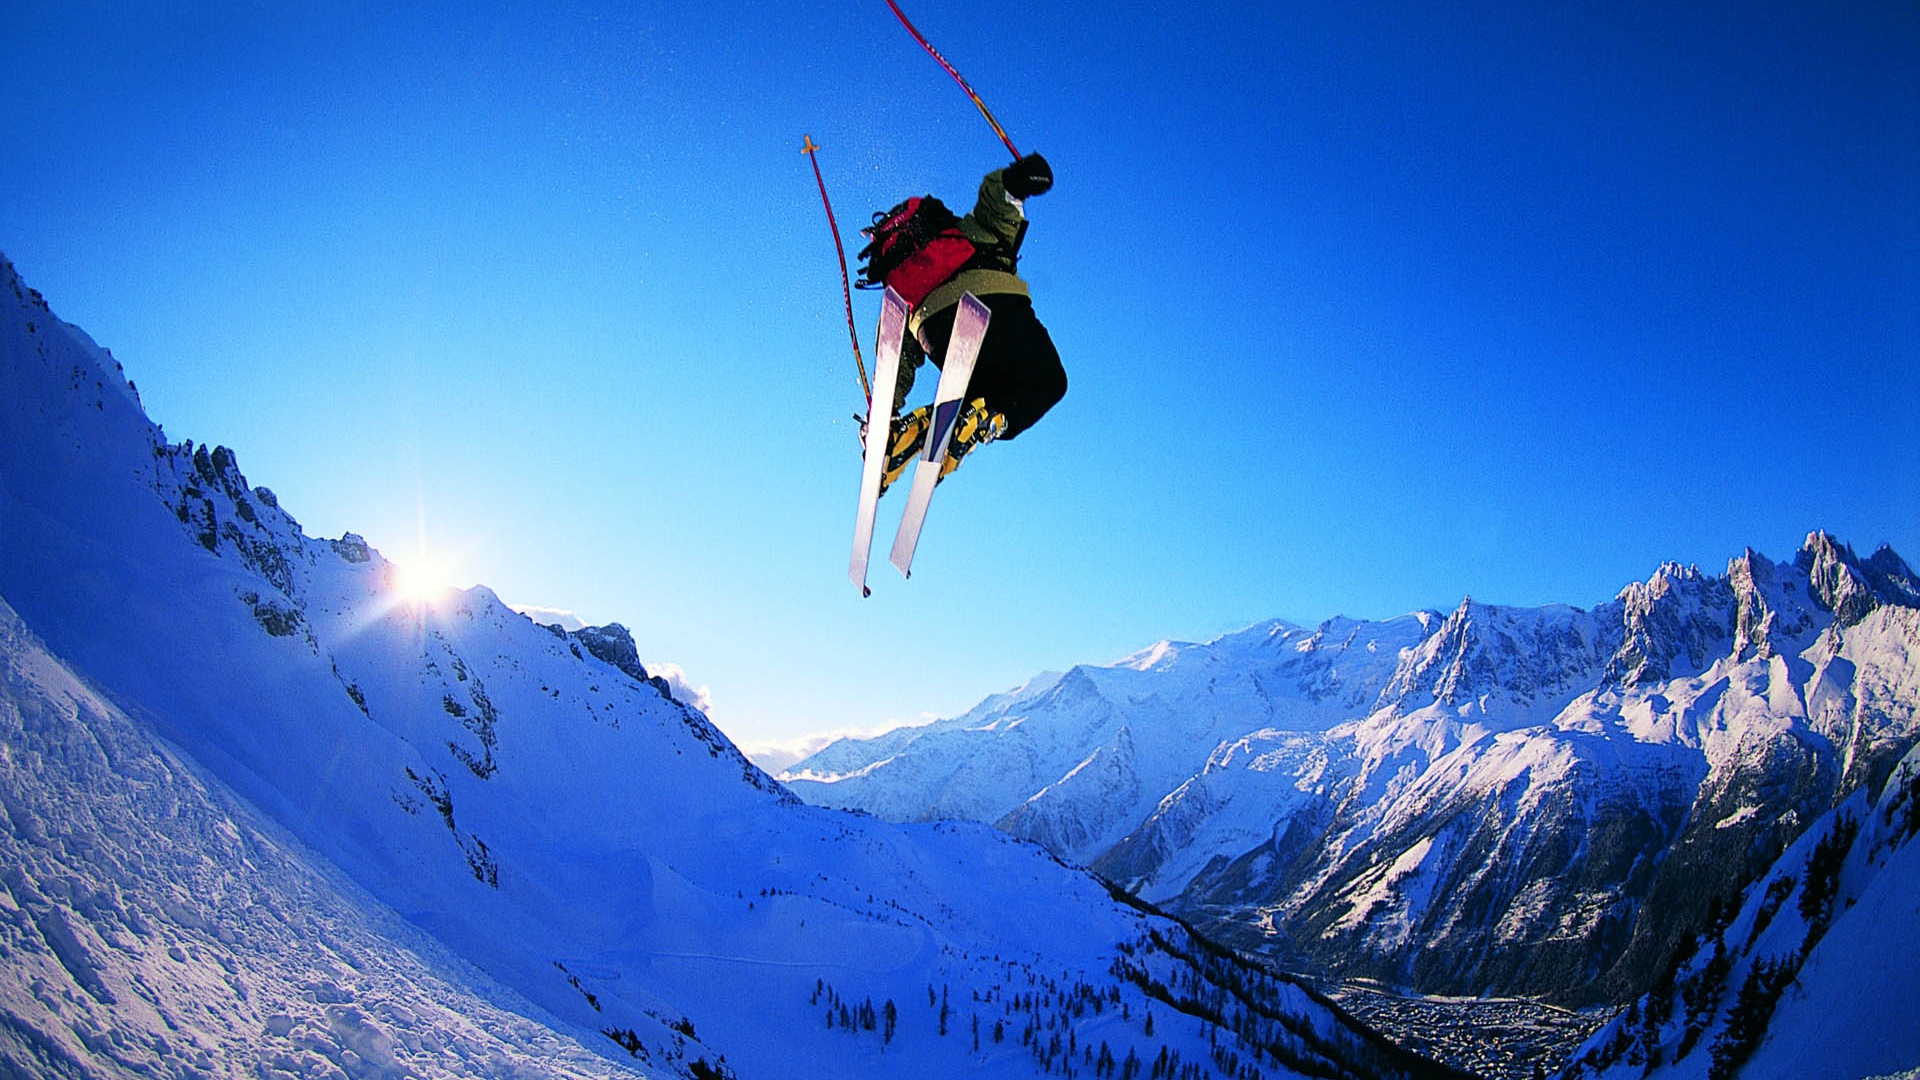 Snowboarding Skiing   Wallpaper High Definition High Quality